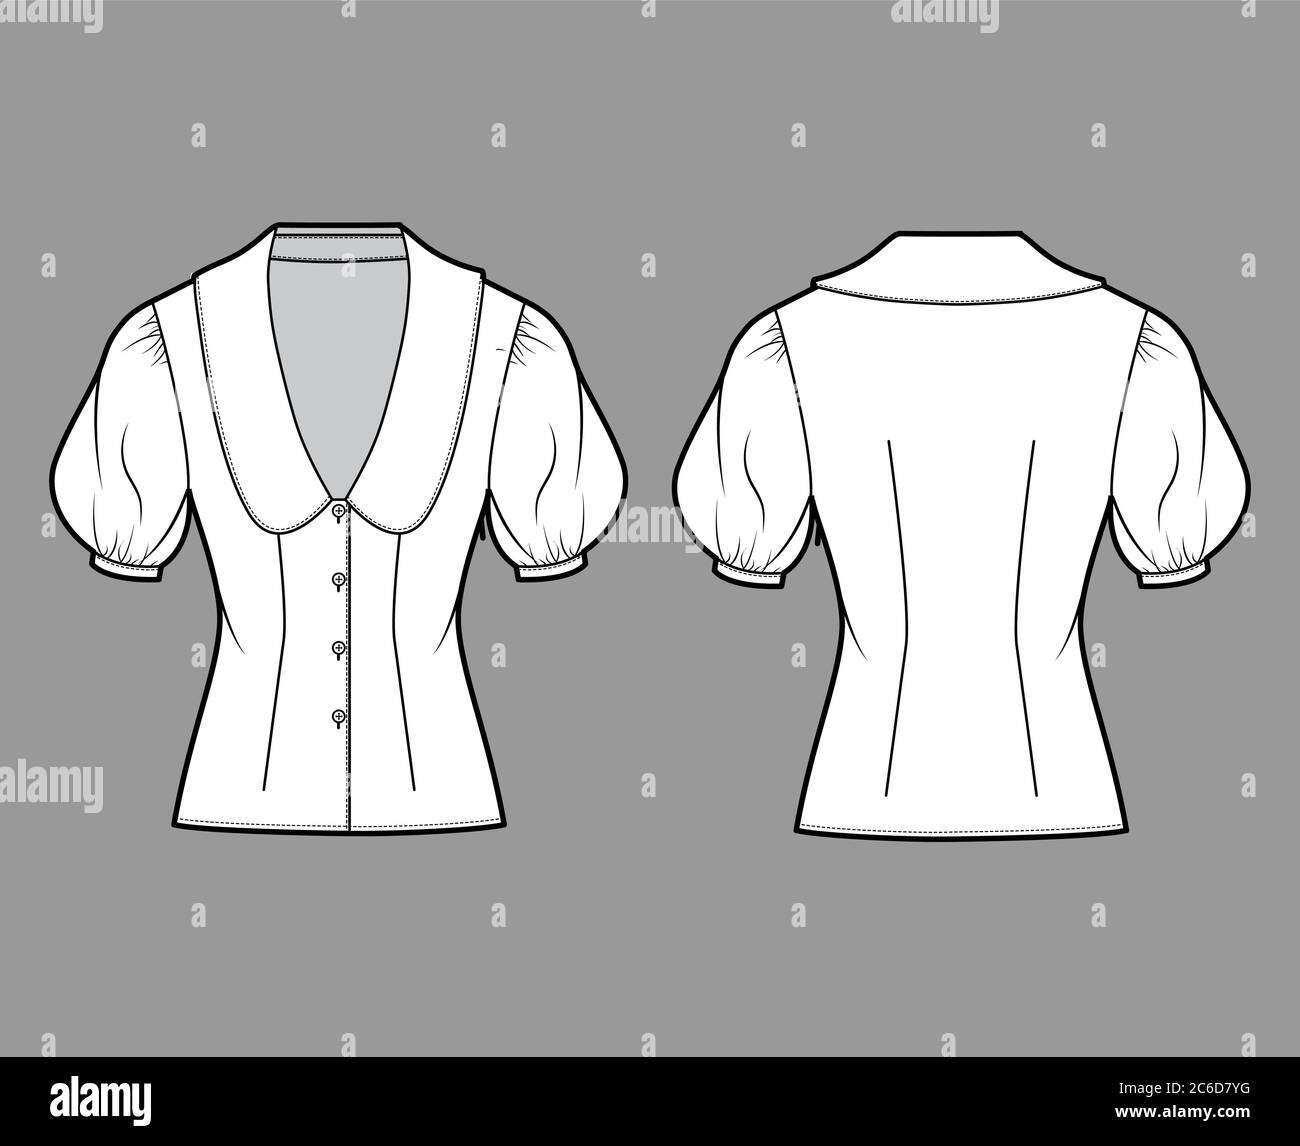 Blouse technical fashion illustration with collar framing the plunging V neck, oversized medium puffed sleeves, fitted body. Flat apparel template front back white color. Women men unisex CAD mockup Stock Vector